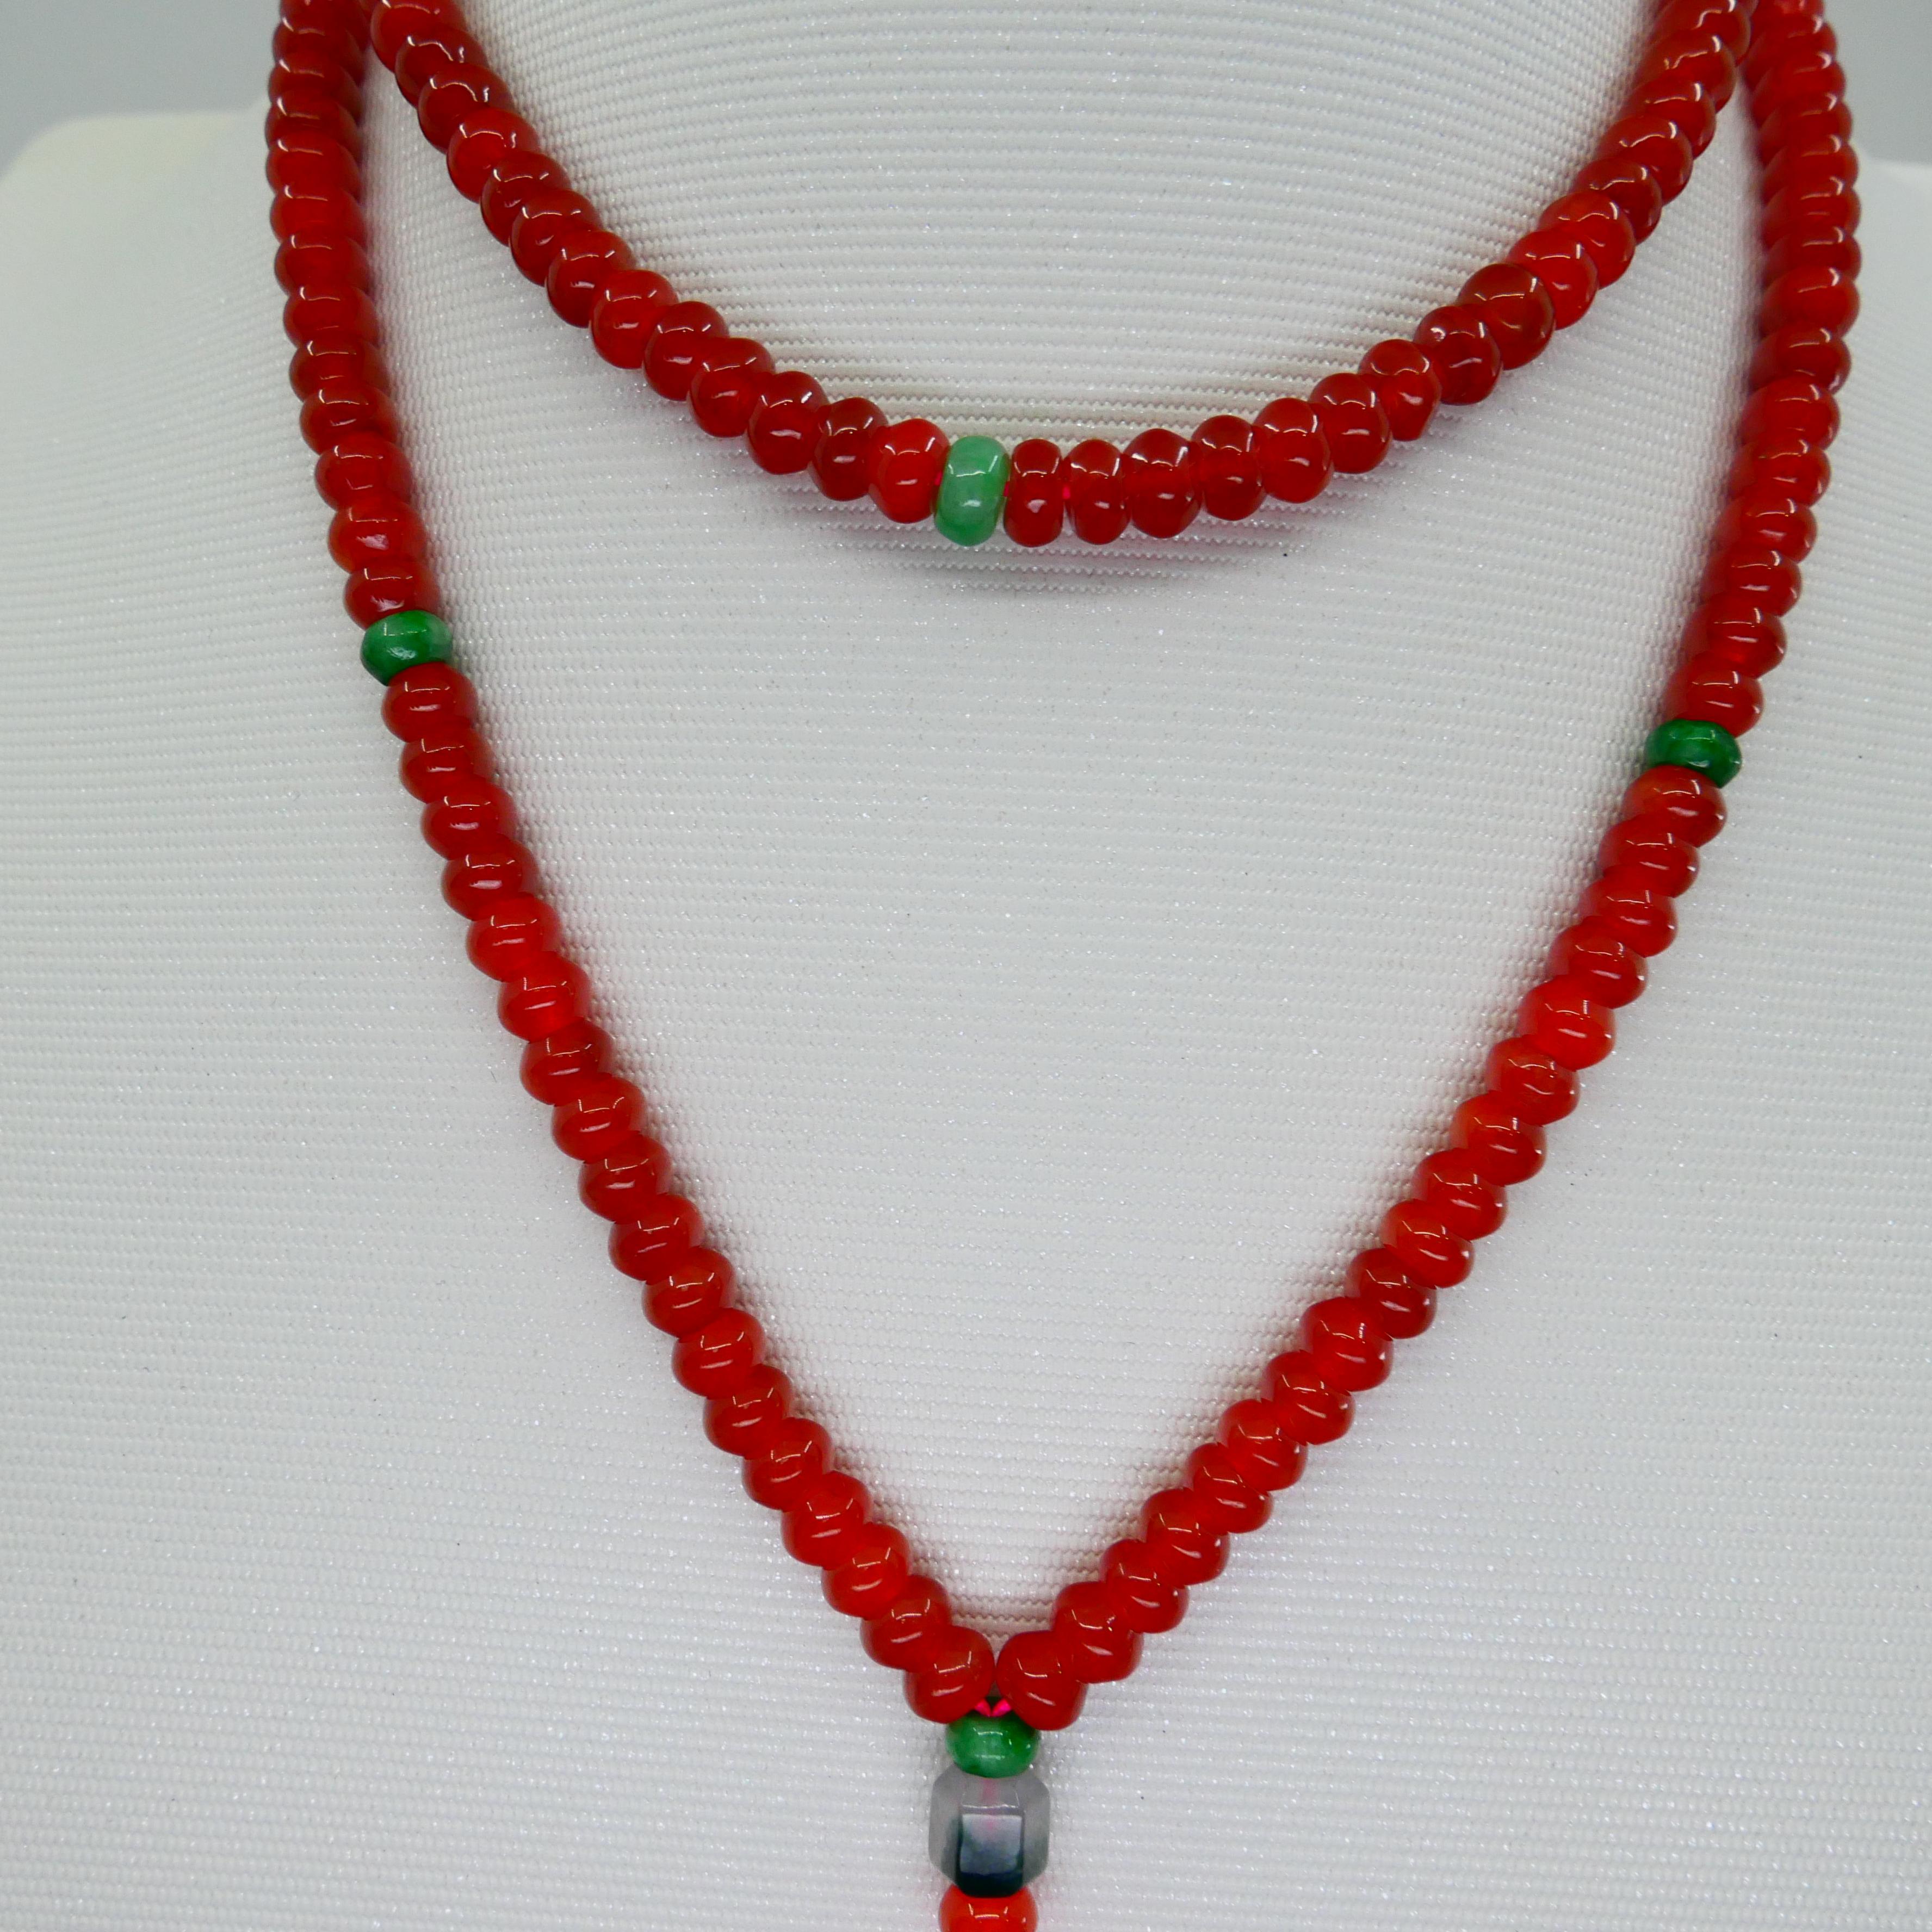 Certified Natural Apple Green & Icy Red Jadeite Jade Bead Necklace, Masterpiece For Sale 2